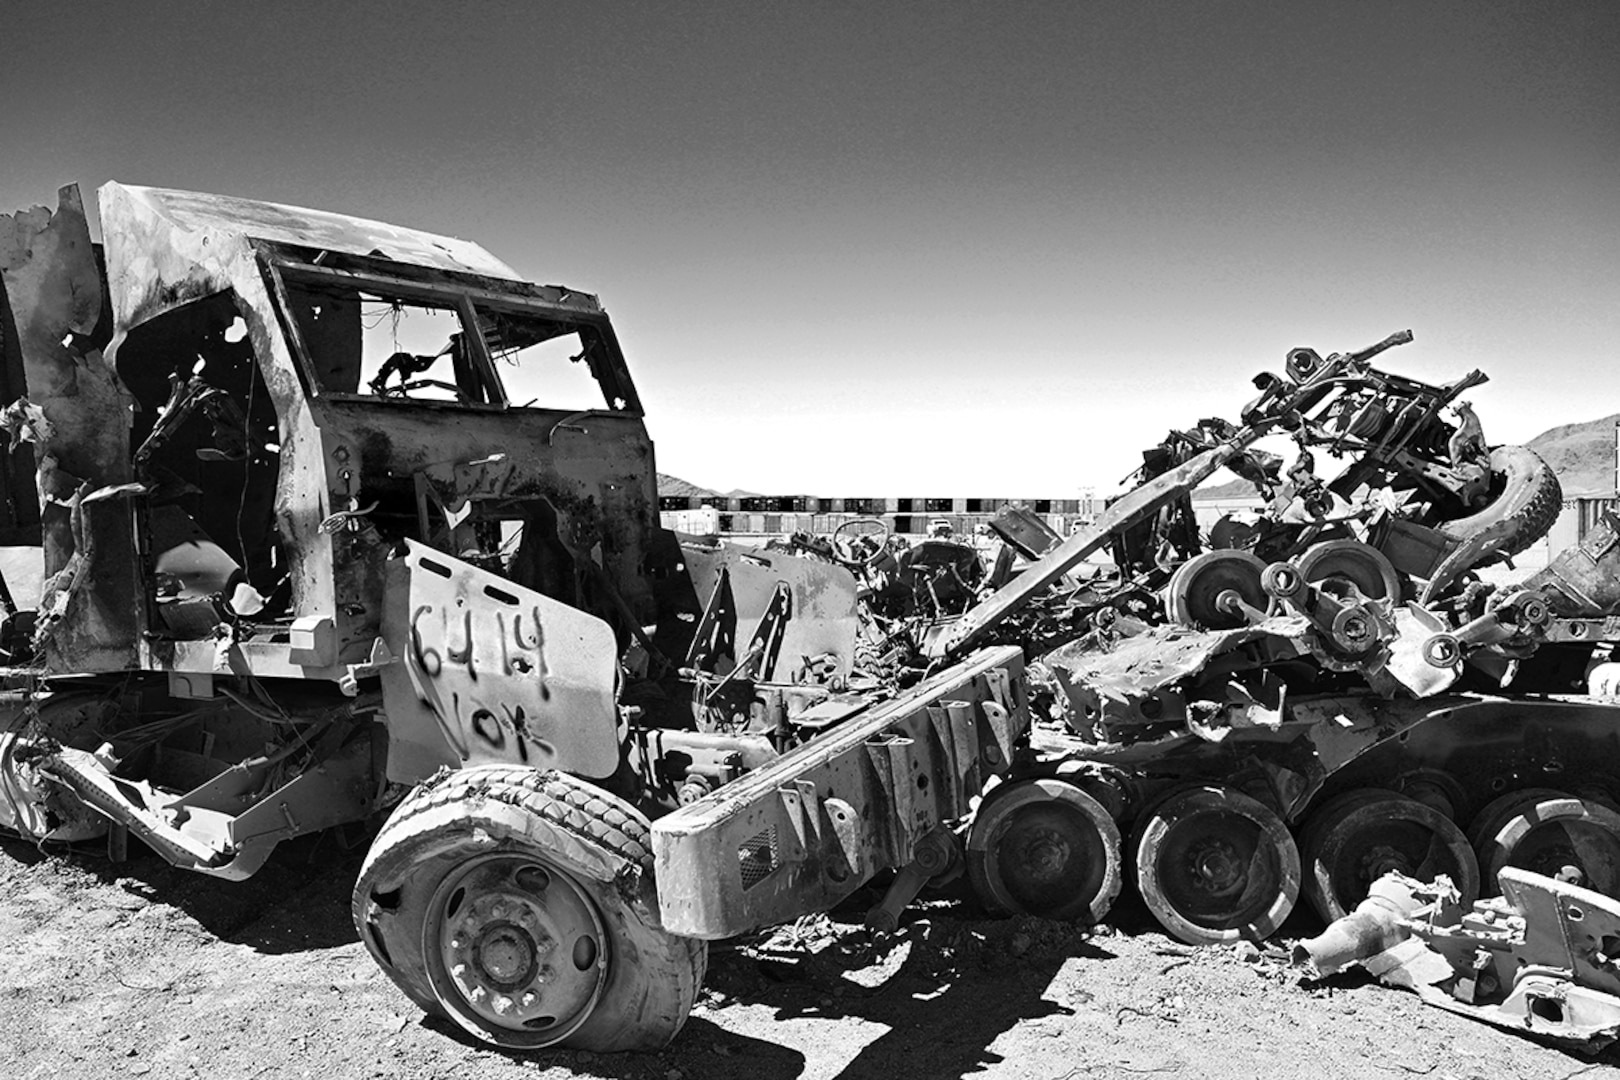 Mangled vehicles and shipping containers.